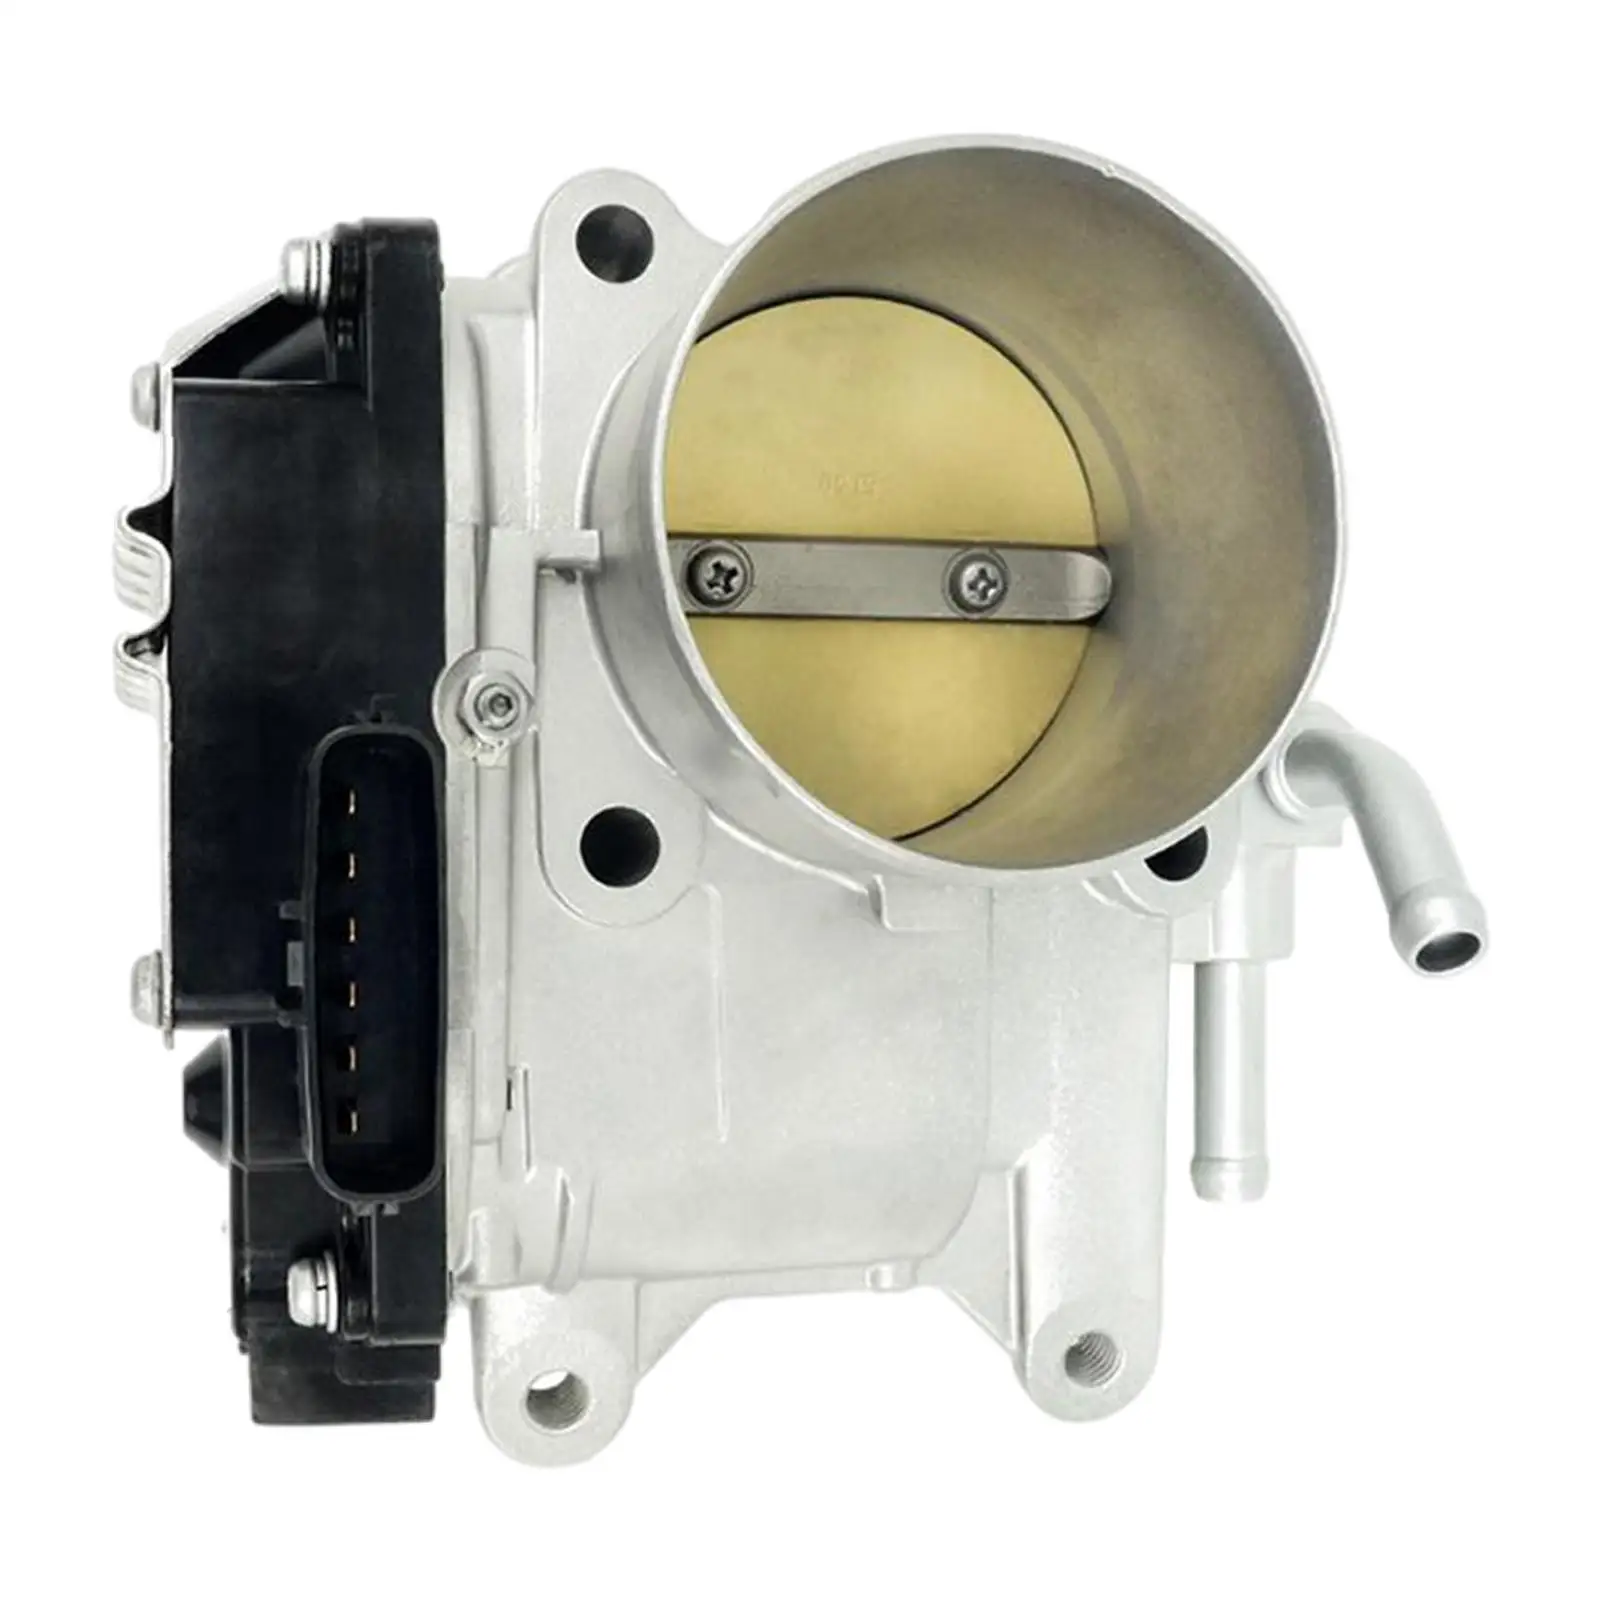 Engine Throttle Body , Fit for  Outlander 2009, Parts Easy to Install 1450A102